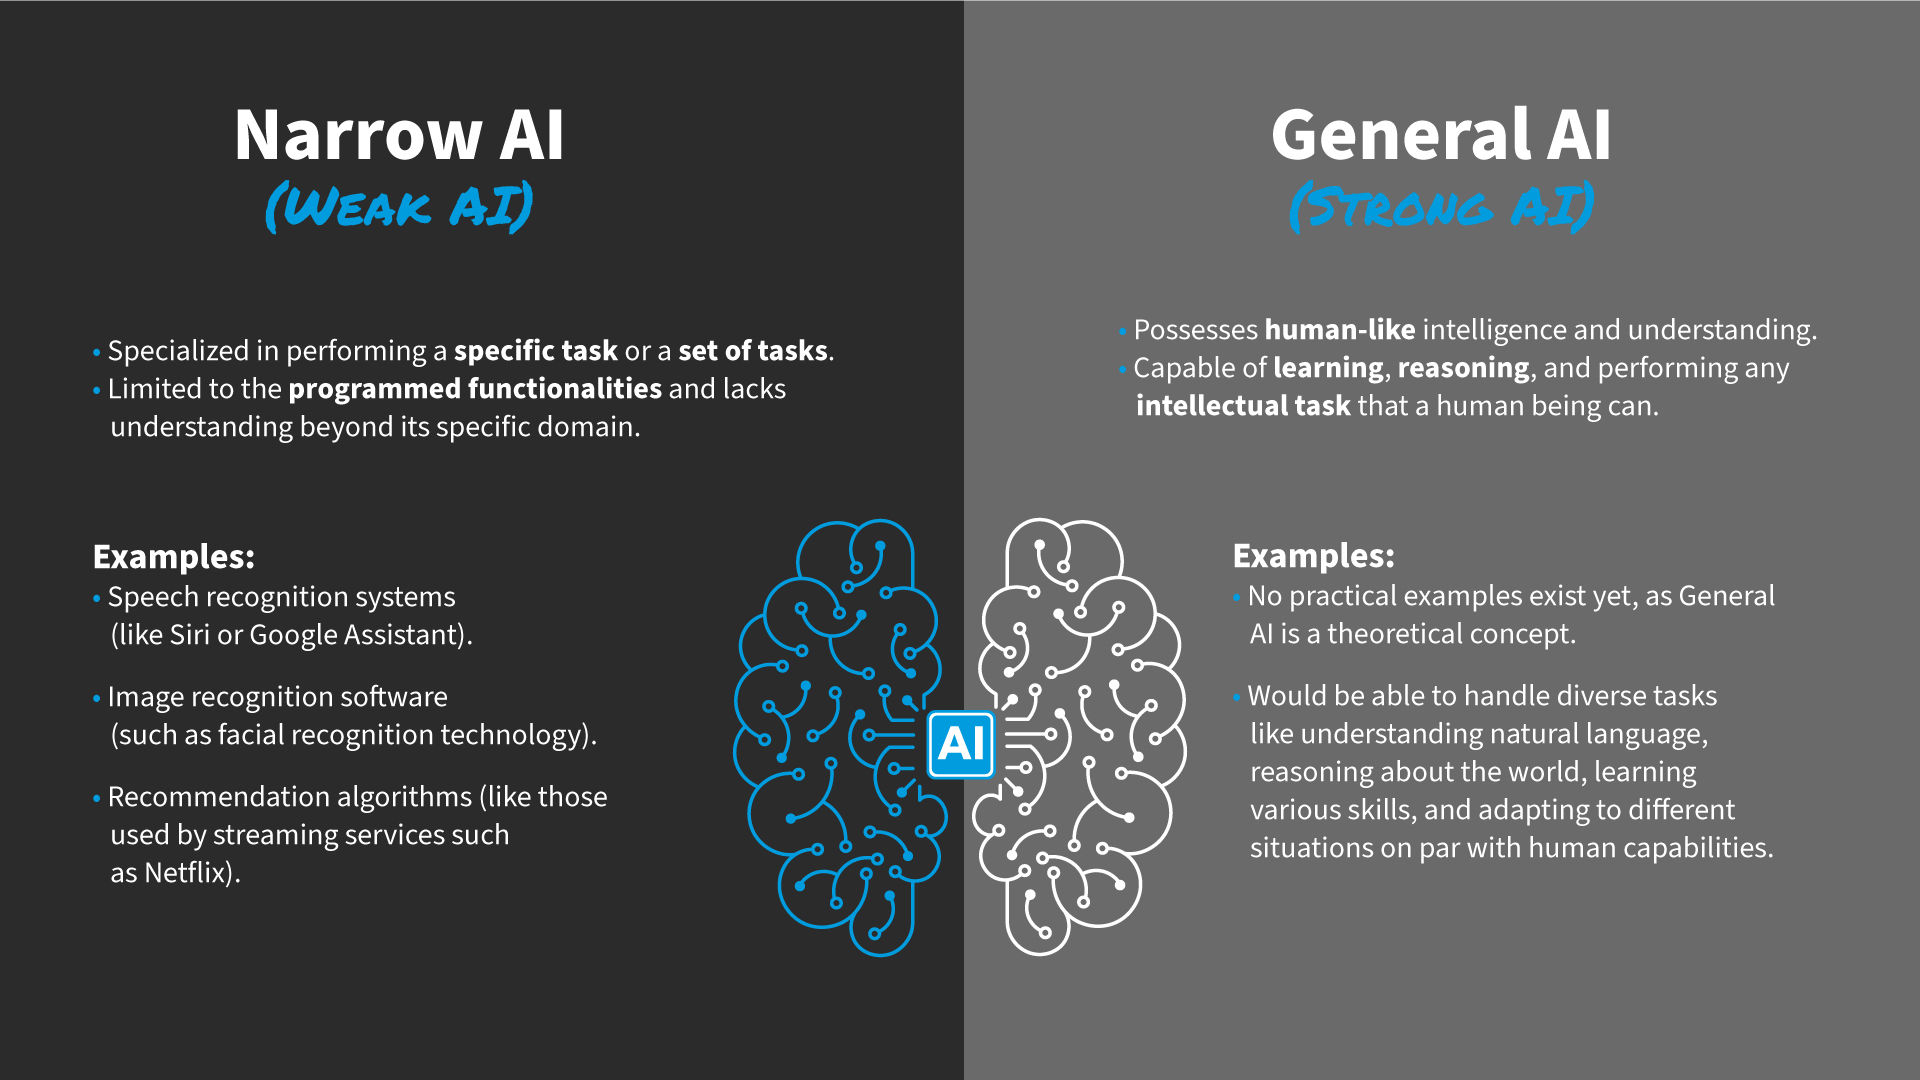 An illustration that represents Narrow AI also known as Weak AI vs General AI or Strong AI. The image includes text descriptions, examples and an illustration of a brain.